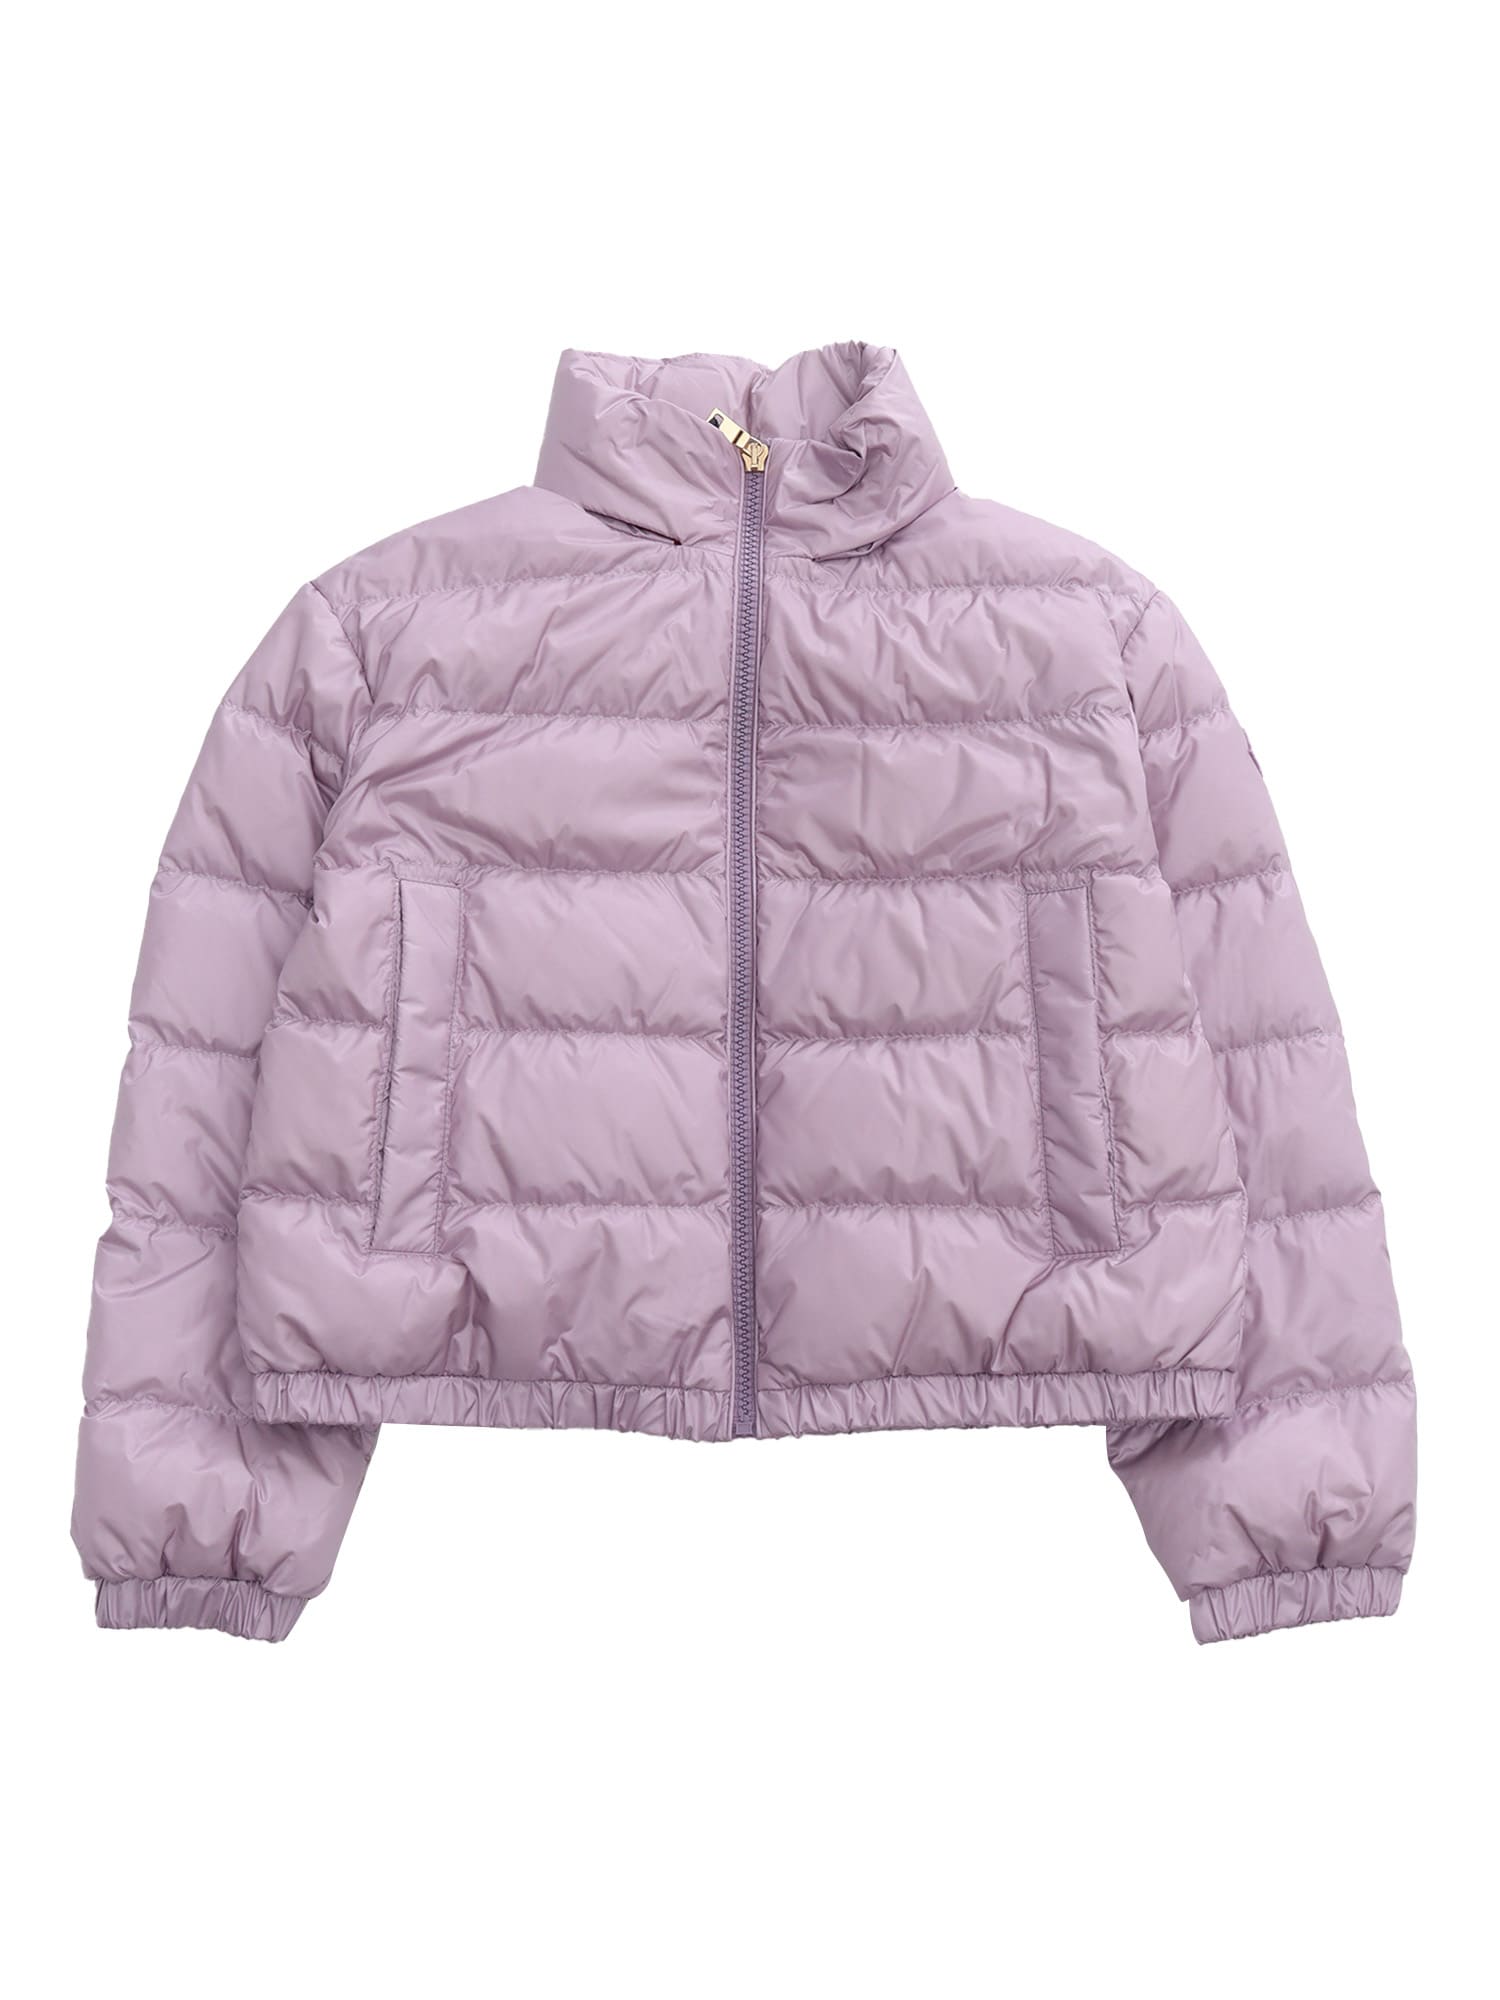 Moncler Kids' Musa Down Jacket In Lilac